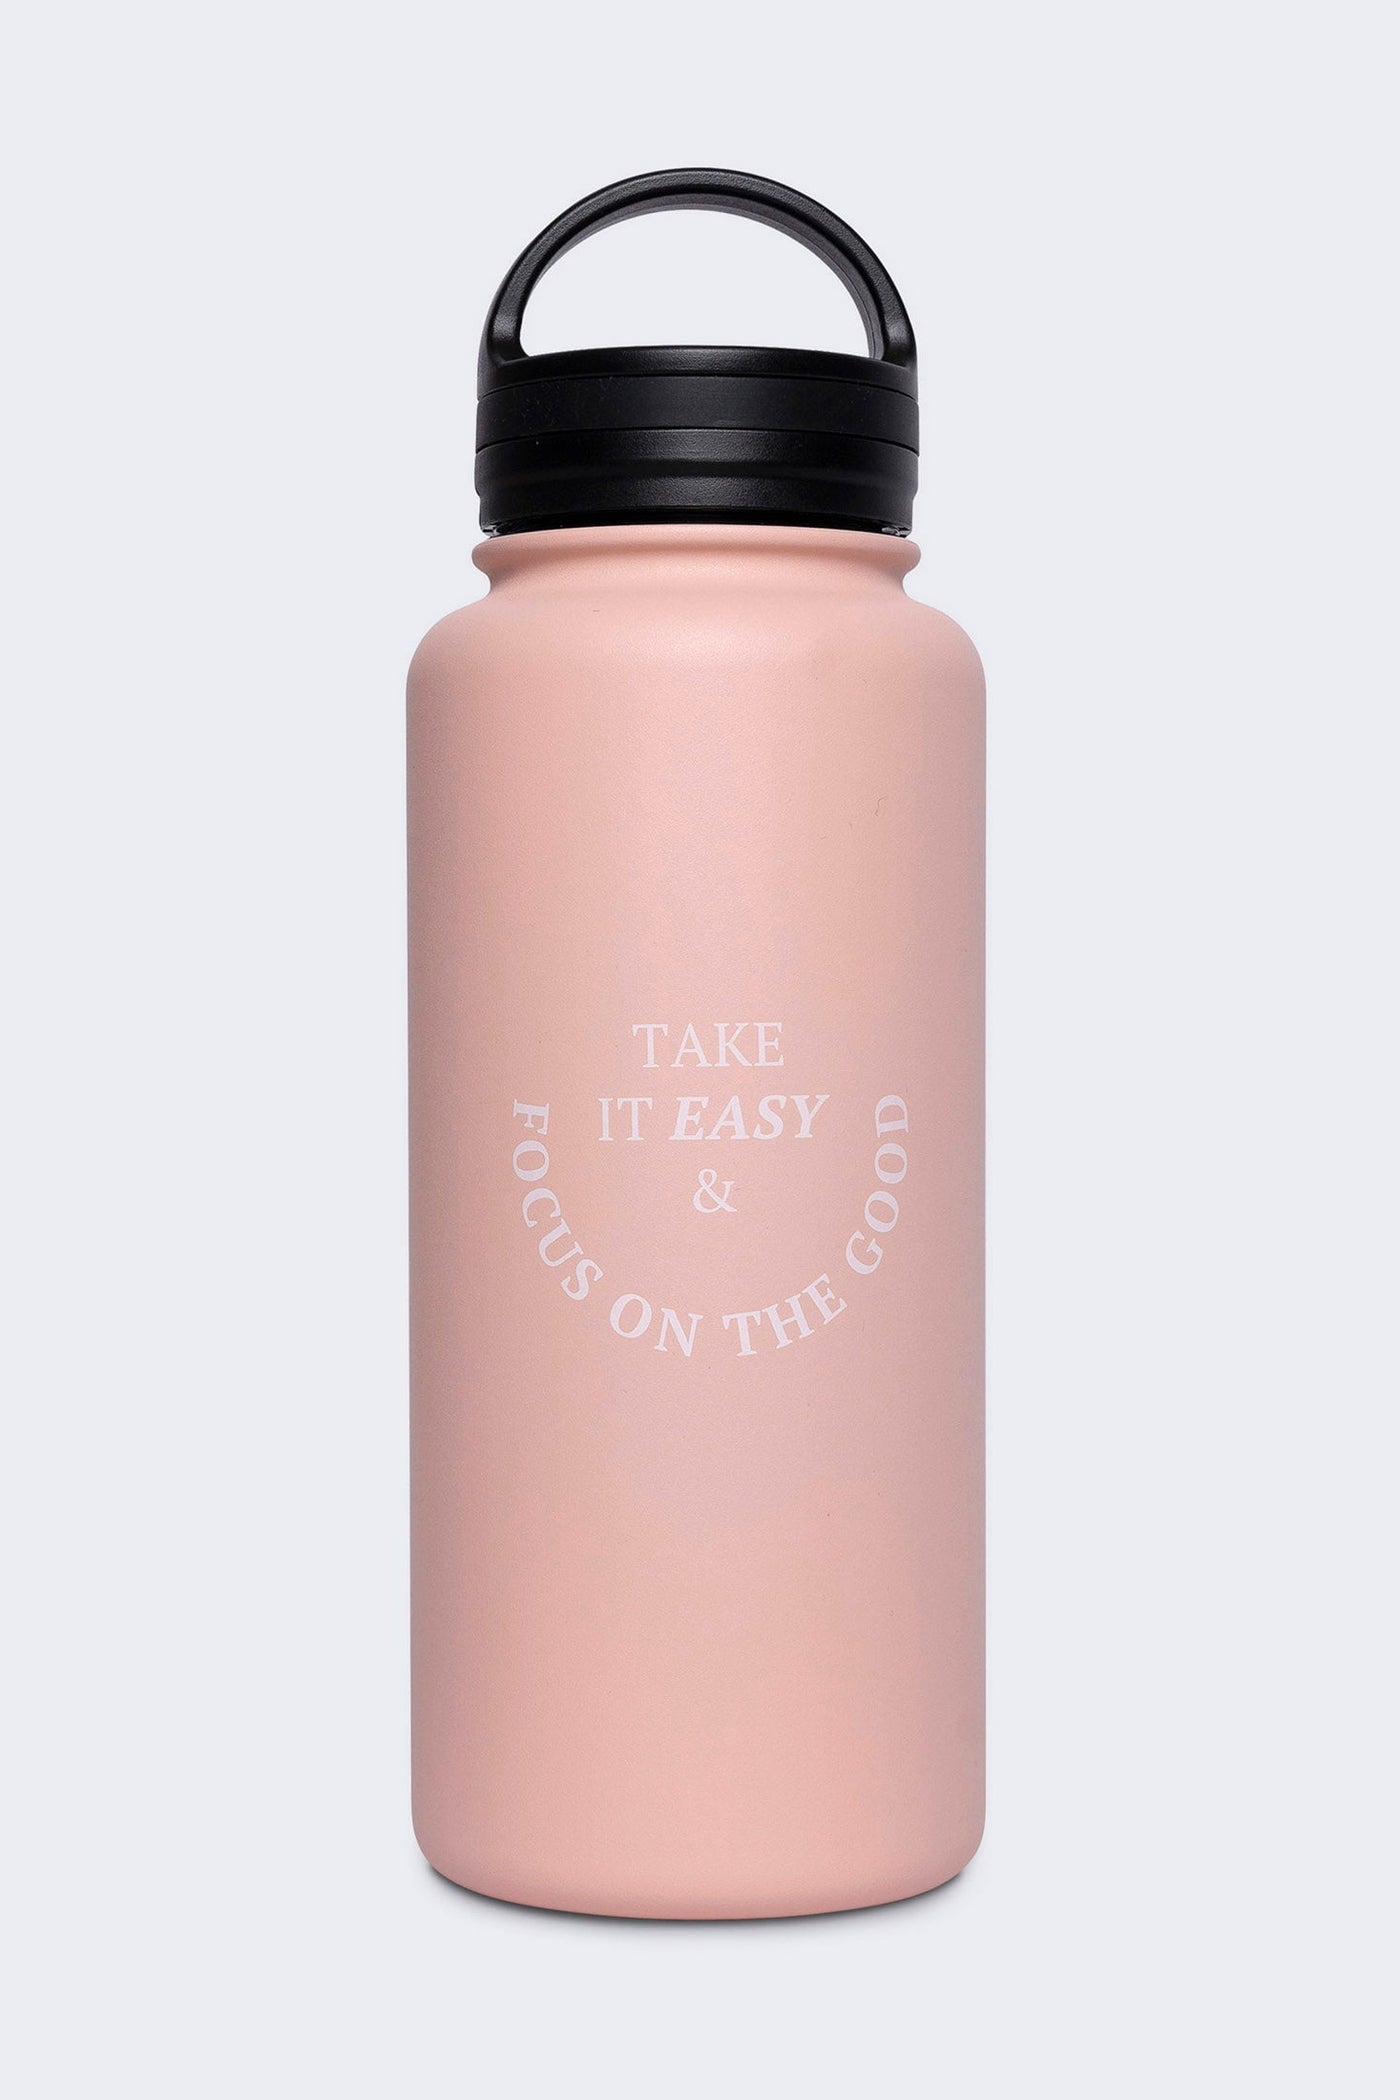 Peach Pink Insulated Bottle - 32oz (1L) Insulated Water Bottle Selfawear 